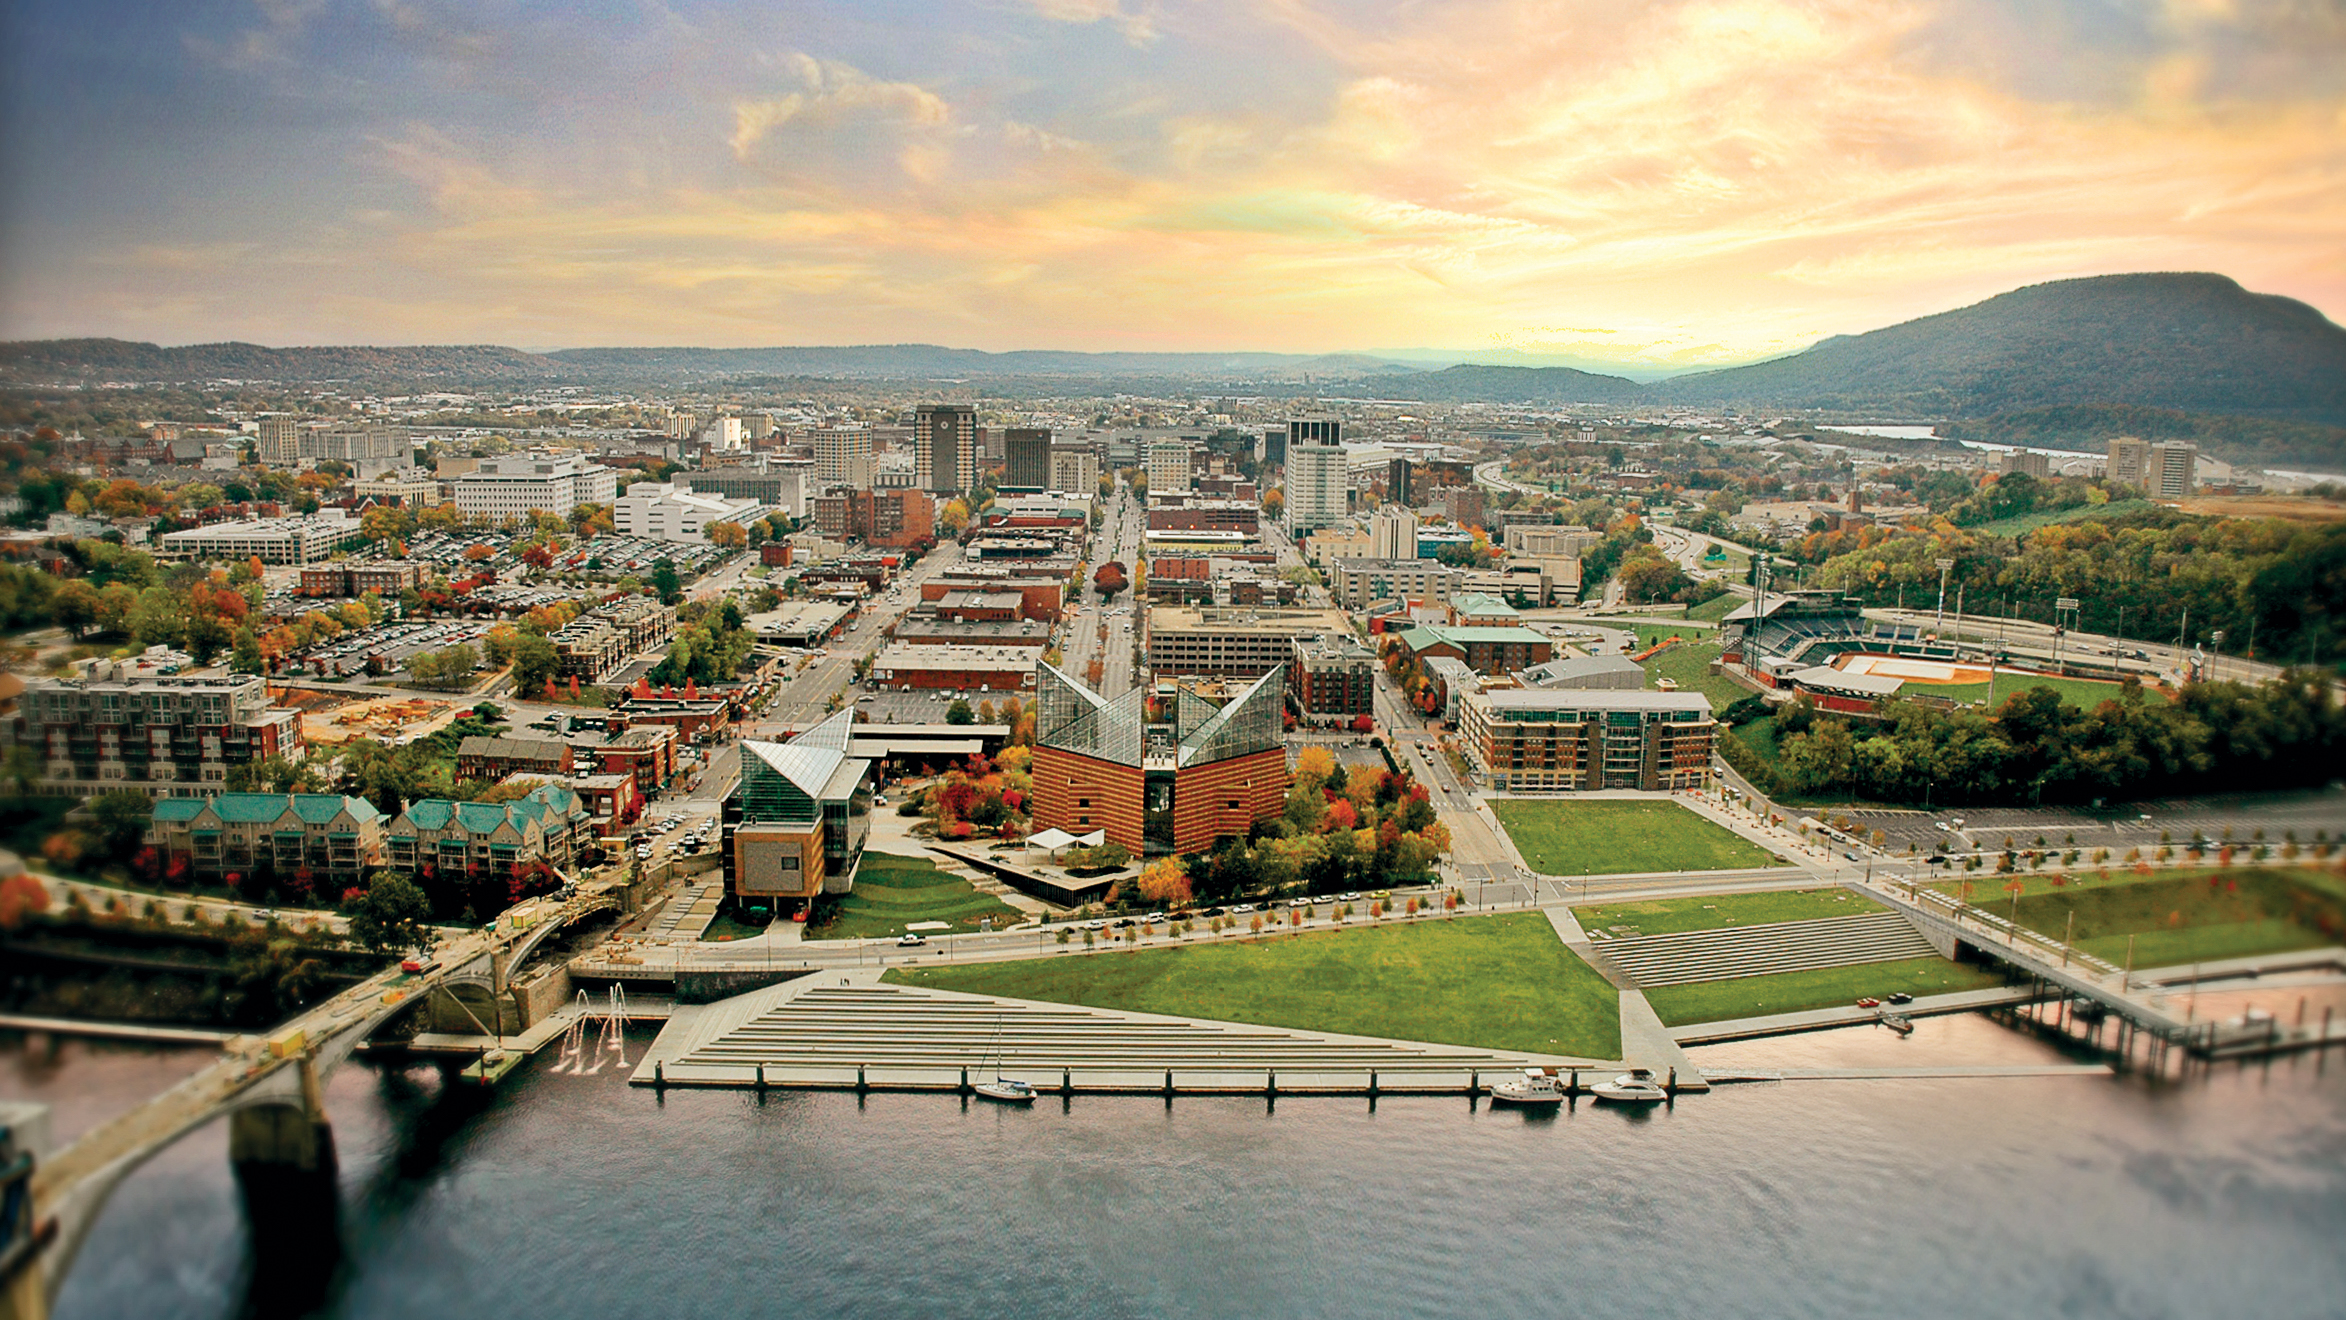 Downtown chattanooga